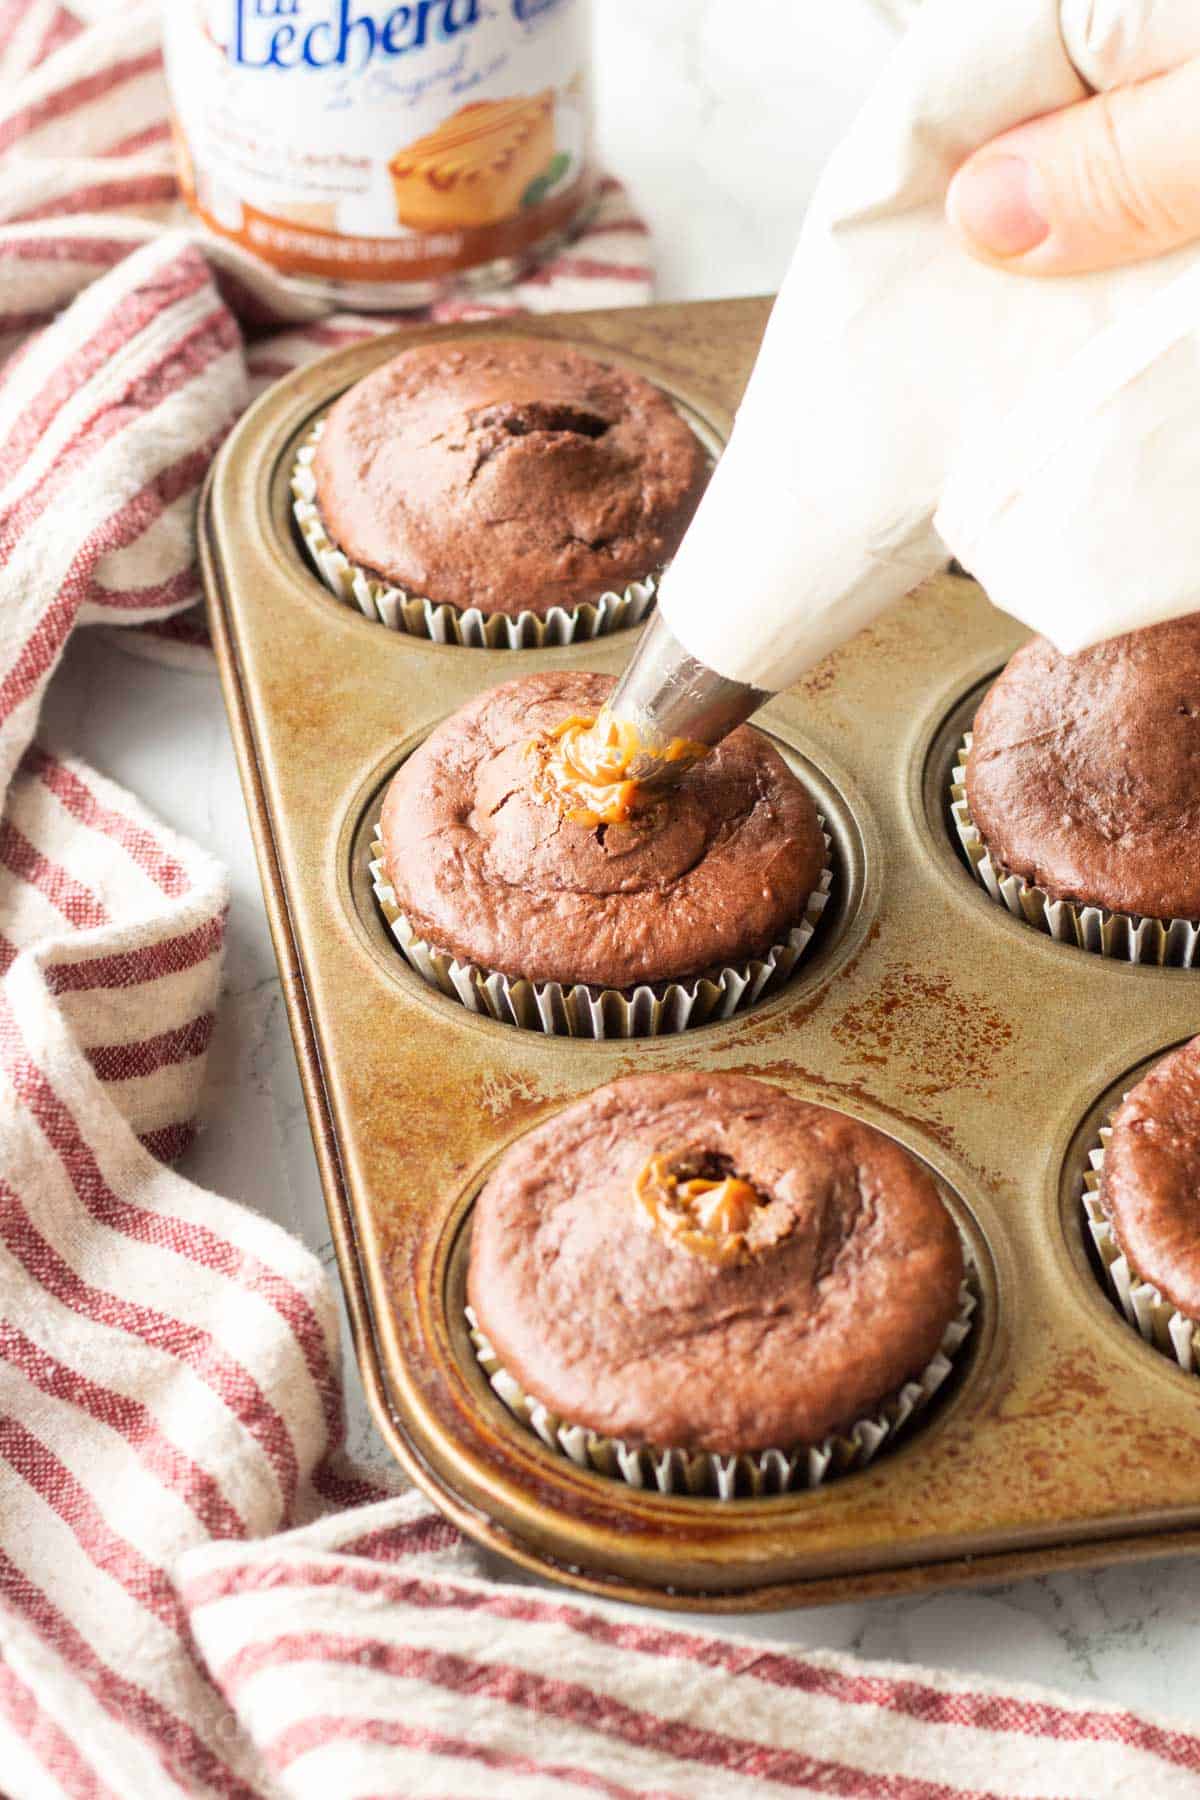 Hand piping dulce de leche into baked chocolate cupcakes in metal pan.